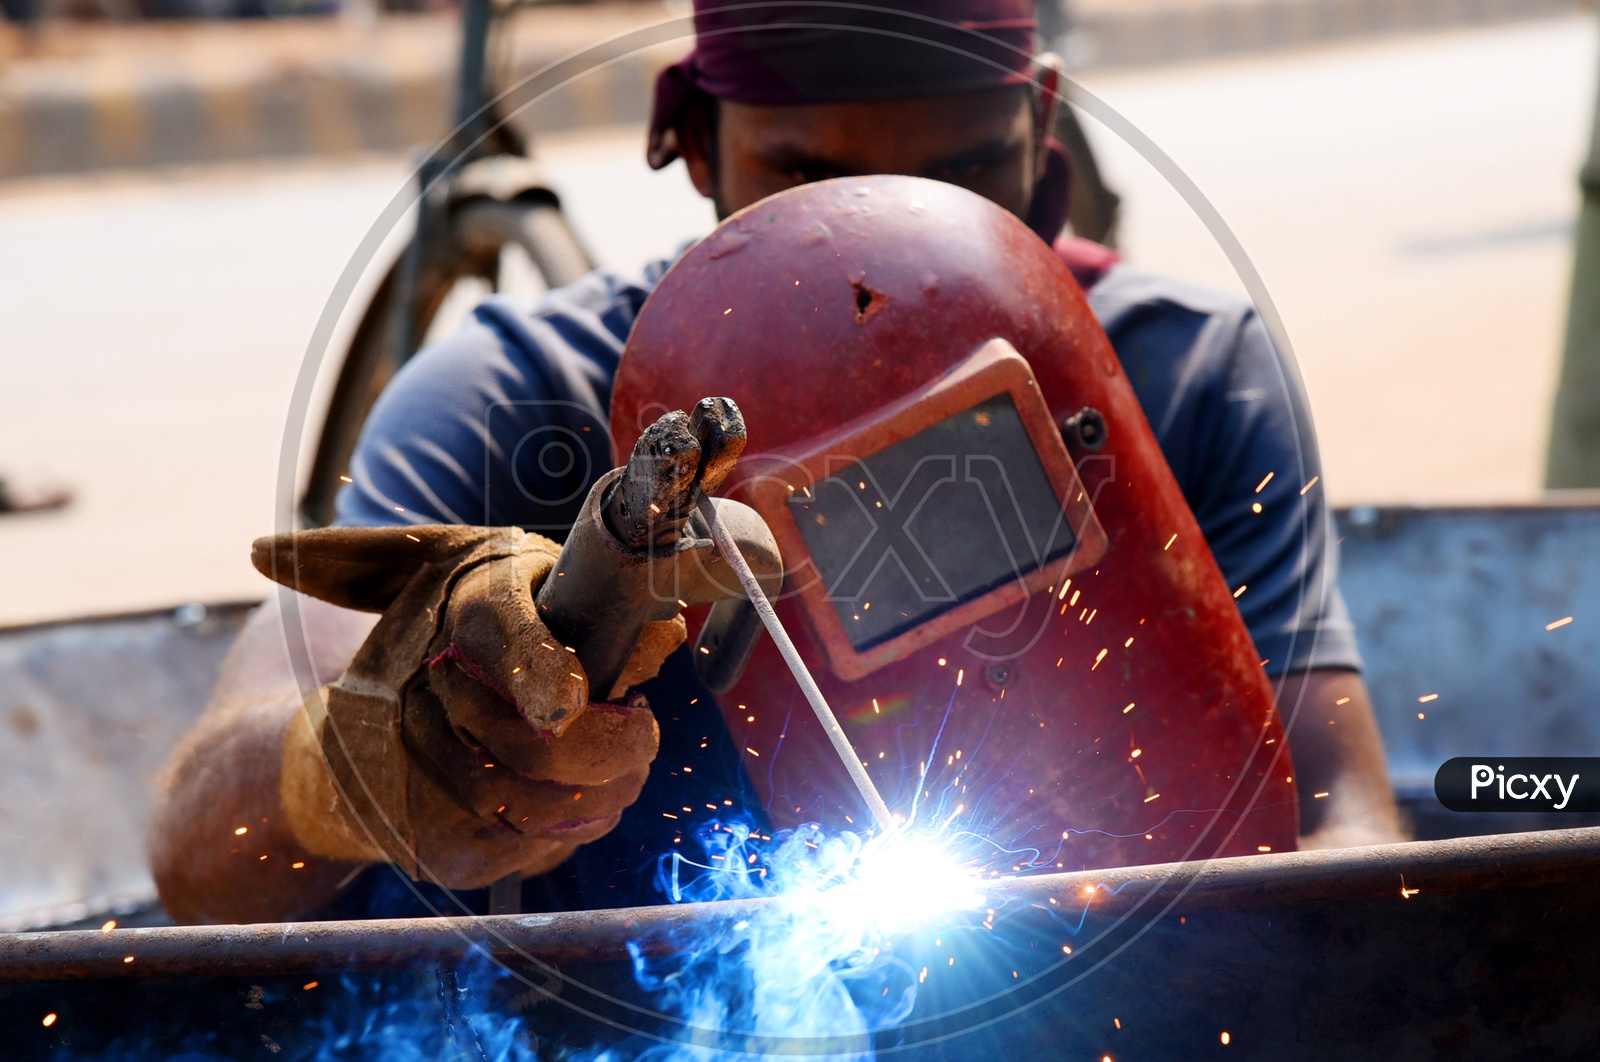 A worker welding work using protective shield